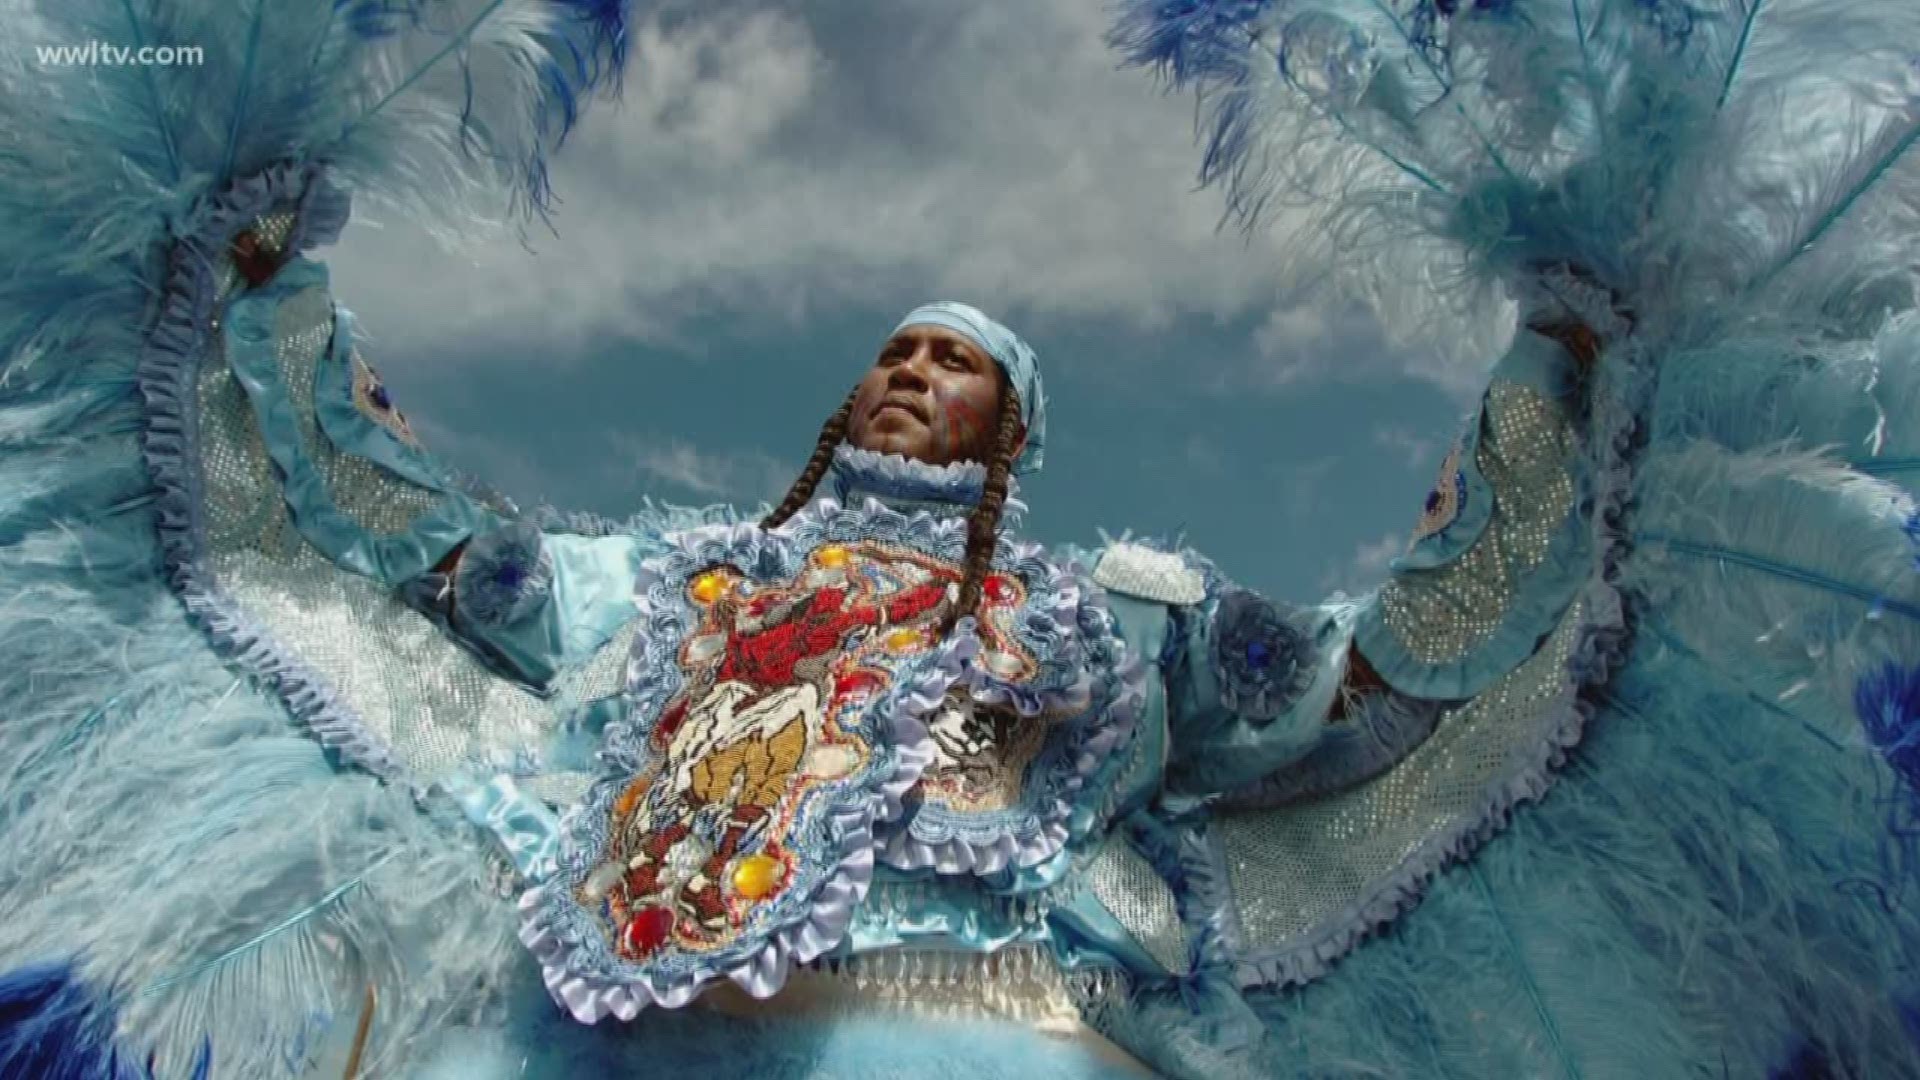 Sheba gets a history lesson on the Carnival tradition we love so much, Mardi Gras Indians, highlighted in a new book written by Photographer John McCusker.